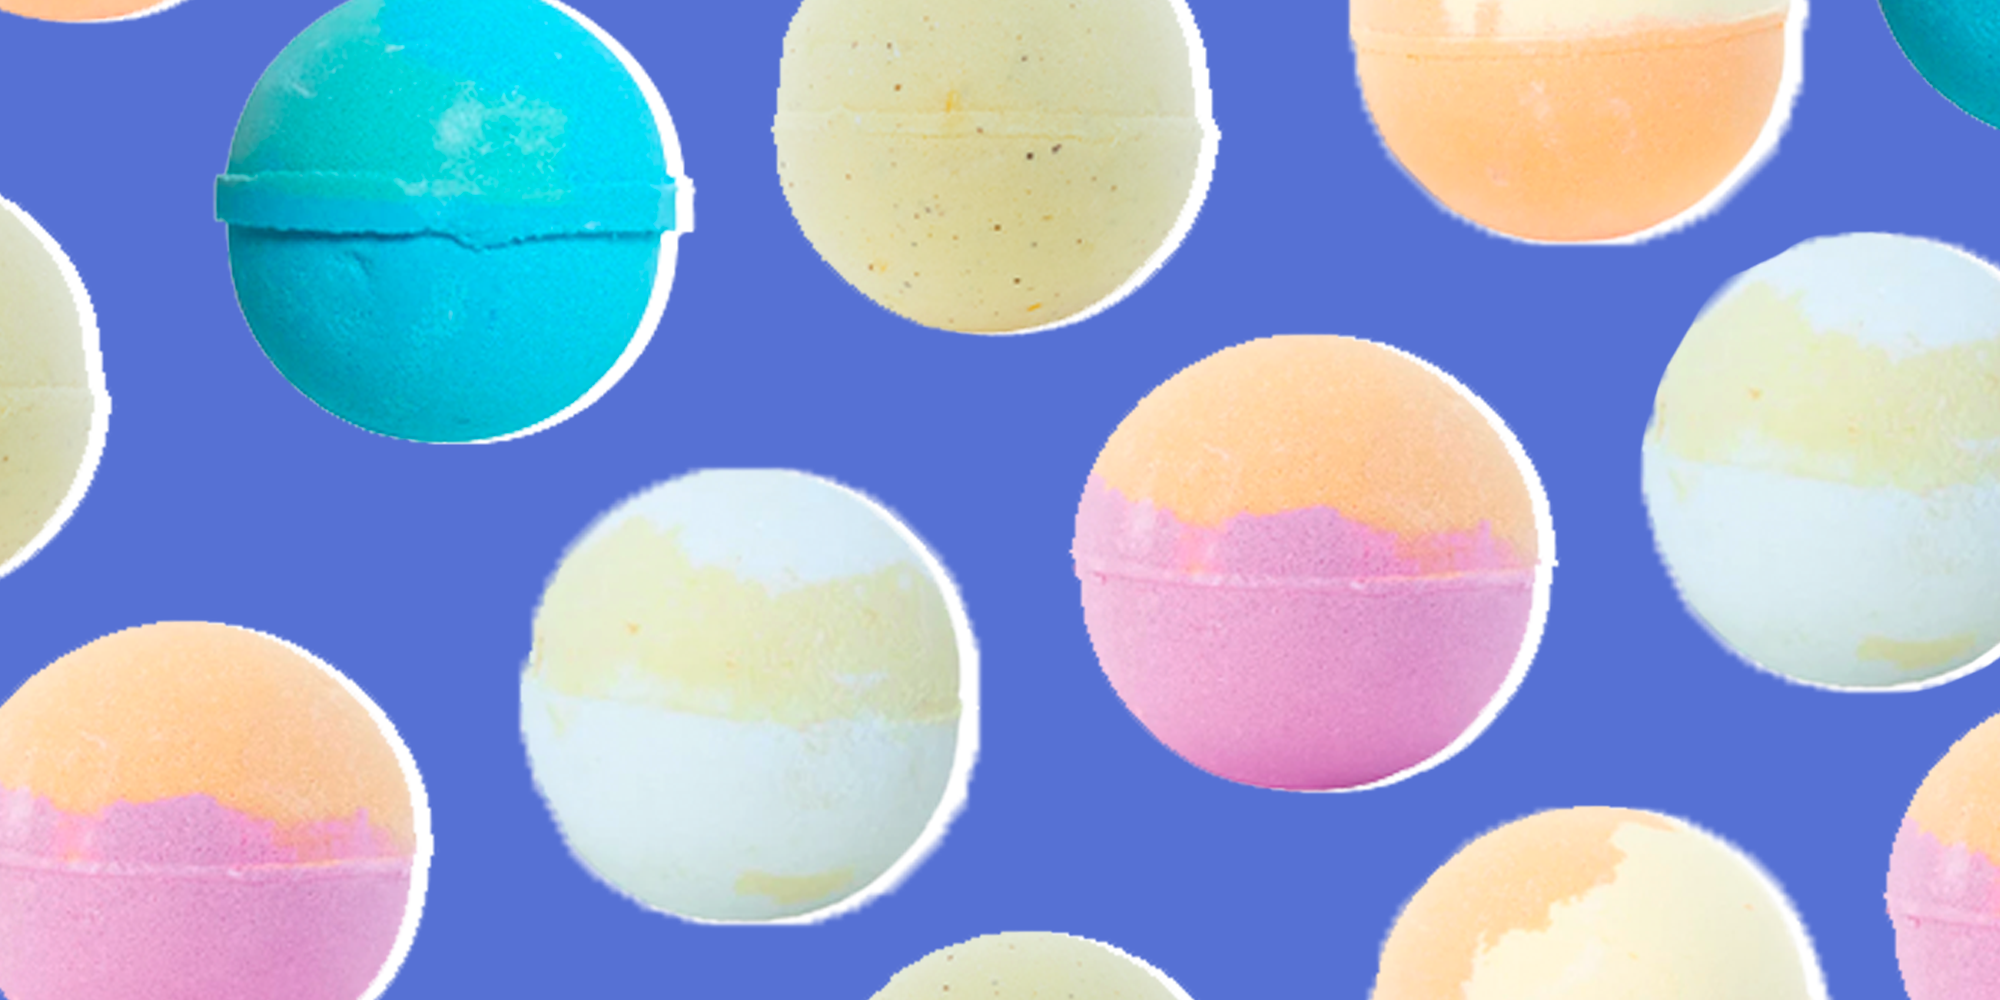 places with bath bombs